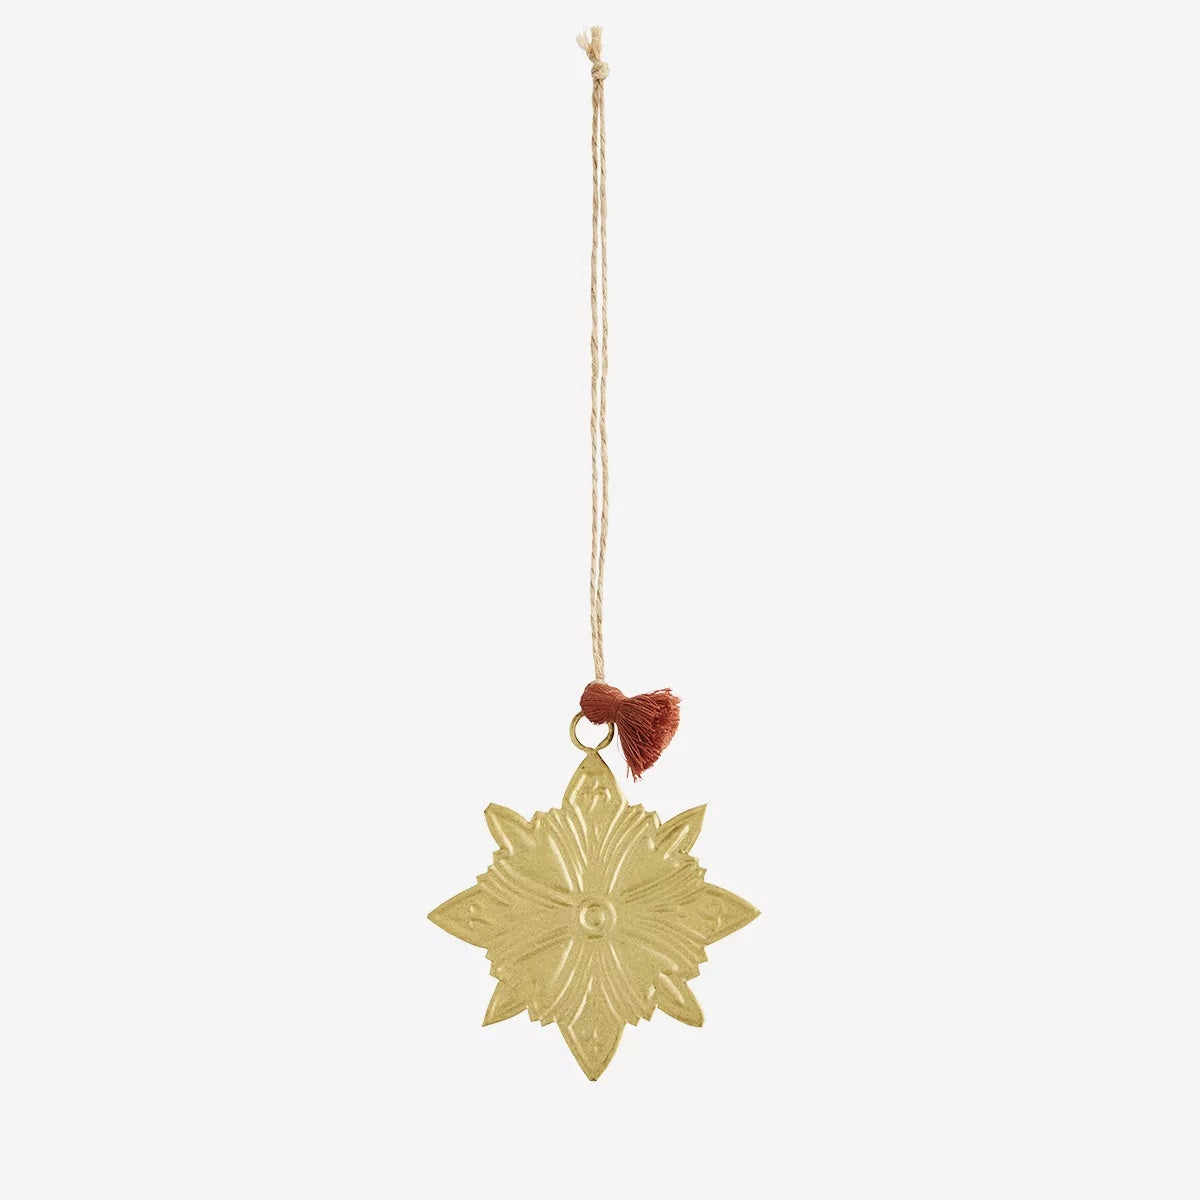 Antique Brass Star Decoration With Embossed Pattern